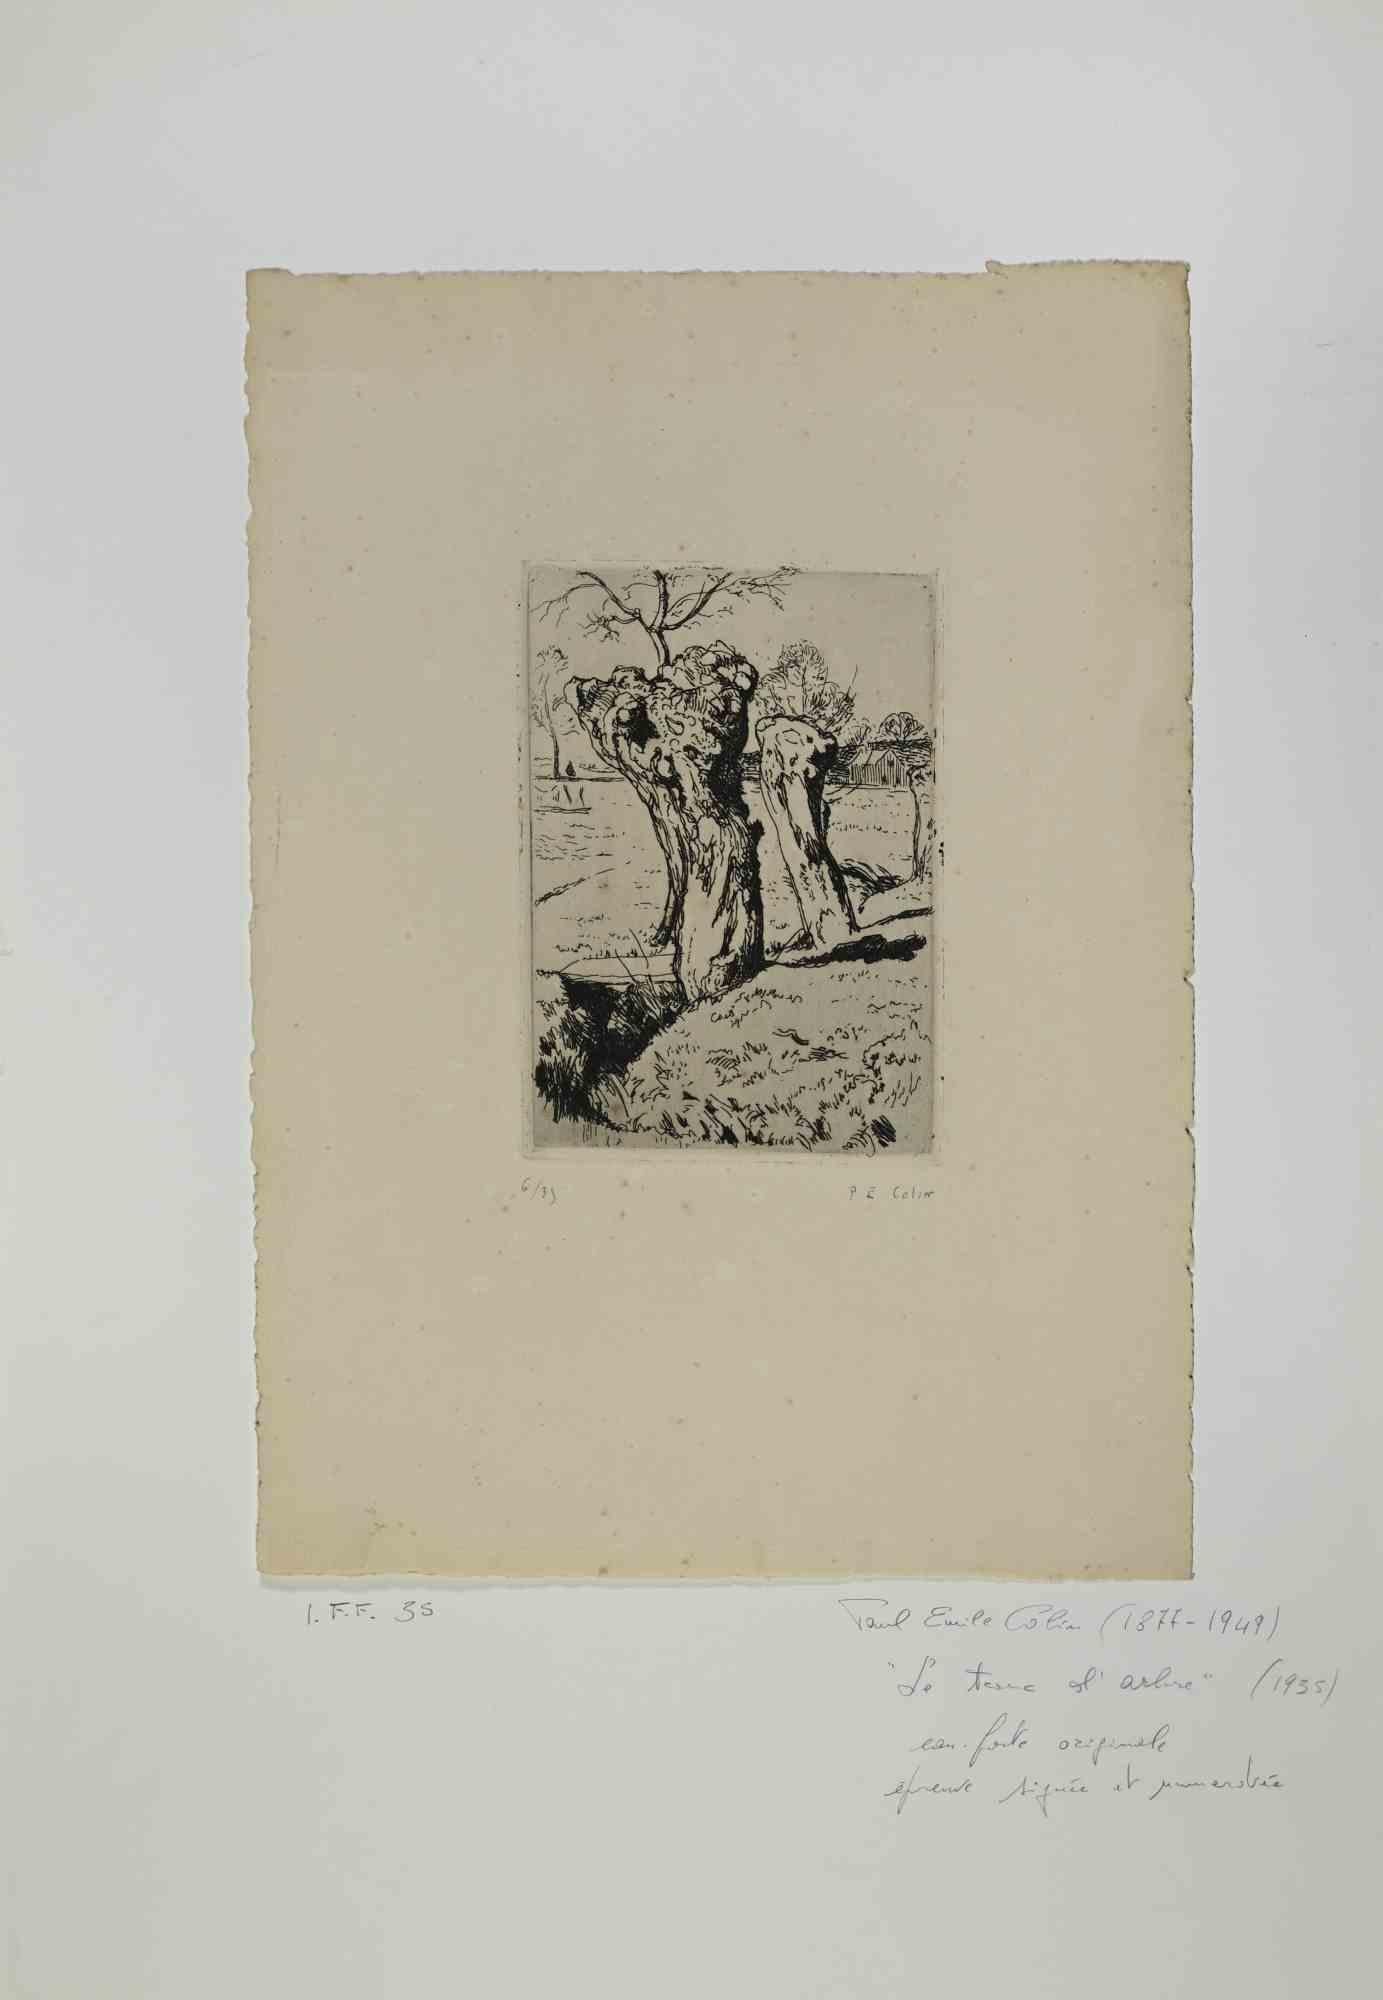 Le Tronc de l'arbre is an artwok realized in 1935, by the French Artist Paul Emile Colin .

Black and white etching on paper. Hand Signed on the right corner. Limited edition of 35, ex. n. 6 

The artwork is attached on passepartout: 49x34 cm.

Good